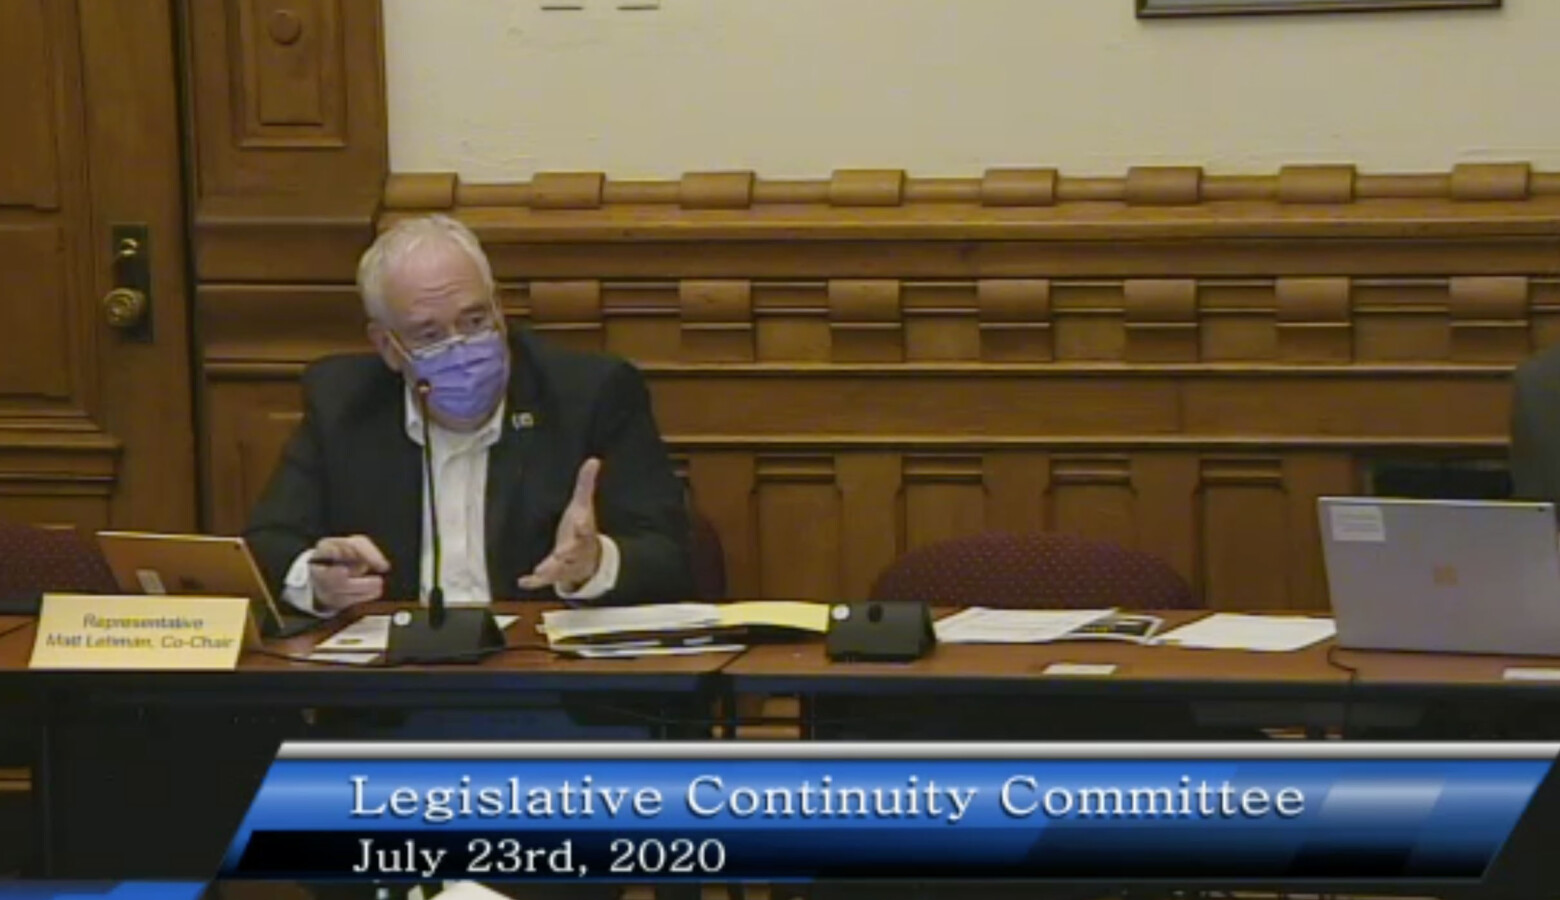 The Legislative Continuity Study Committee, chaired by Rep. Matt Lehman (R-Berne), is tasked with preparing for a legislative session in January that must adjust to the COVID-19 pandemic. (Screenshot of committee livestream)